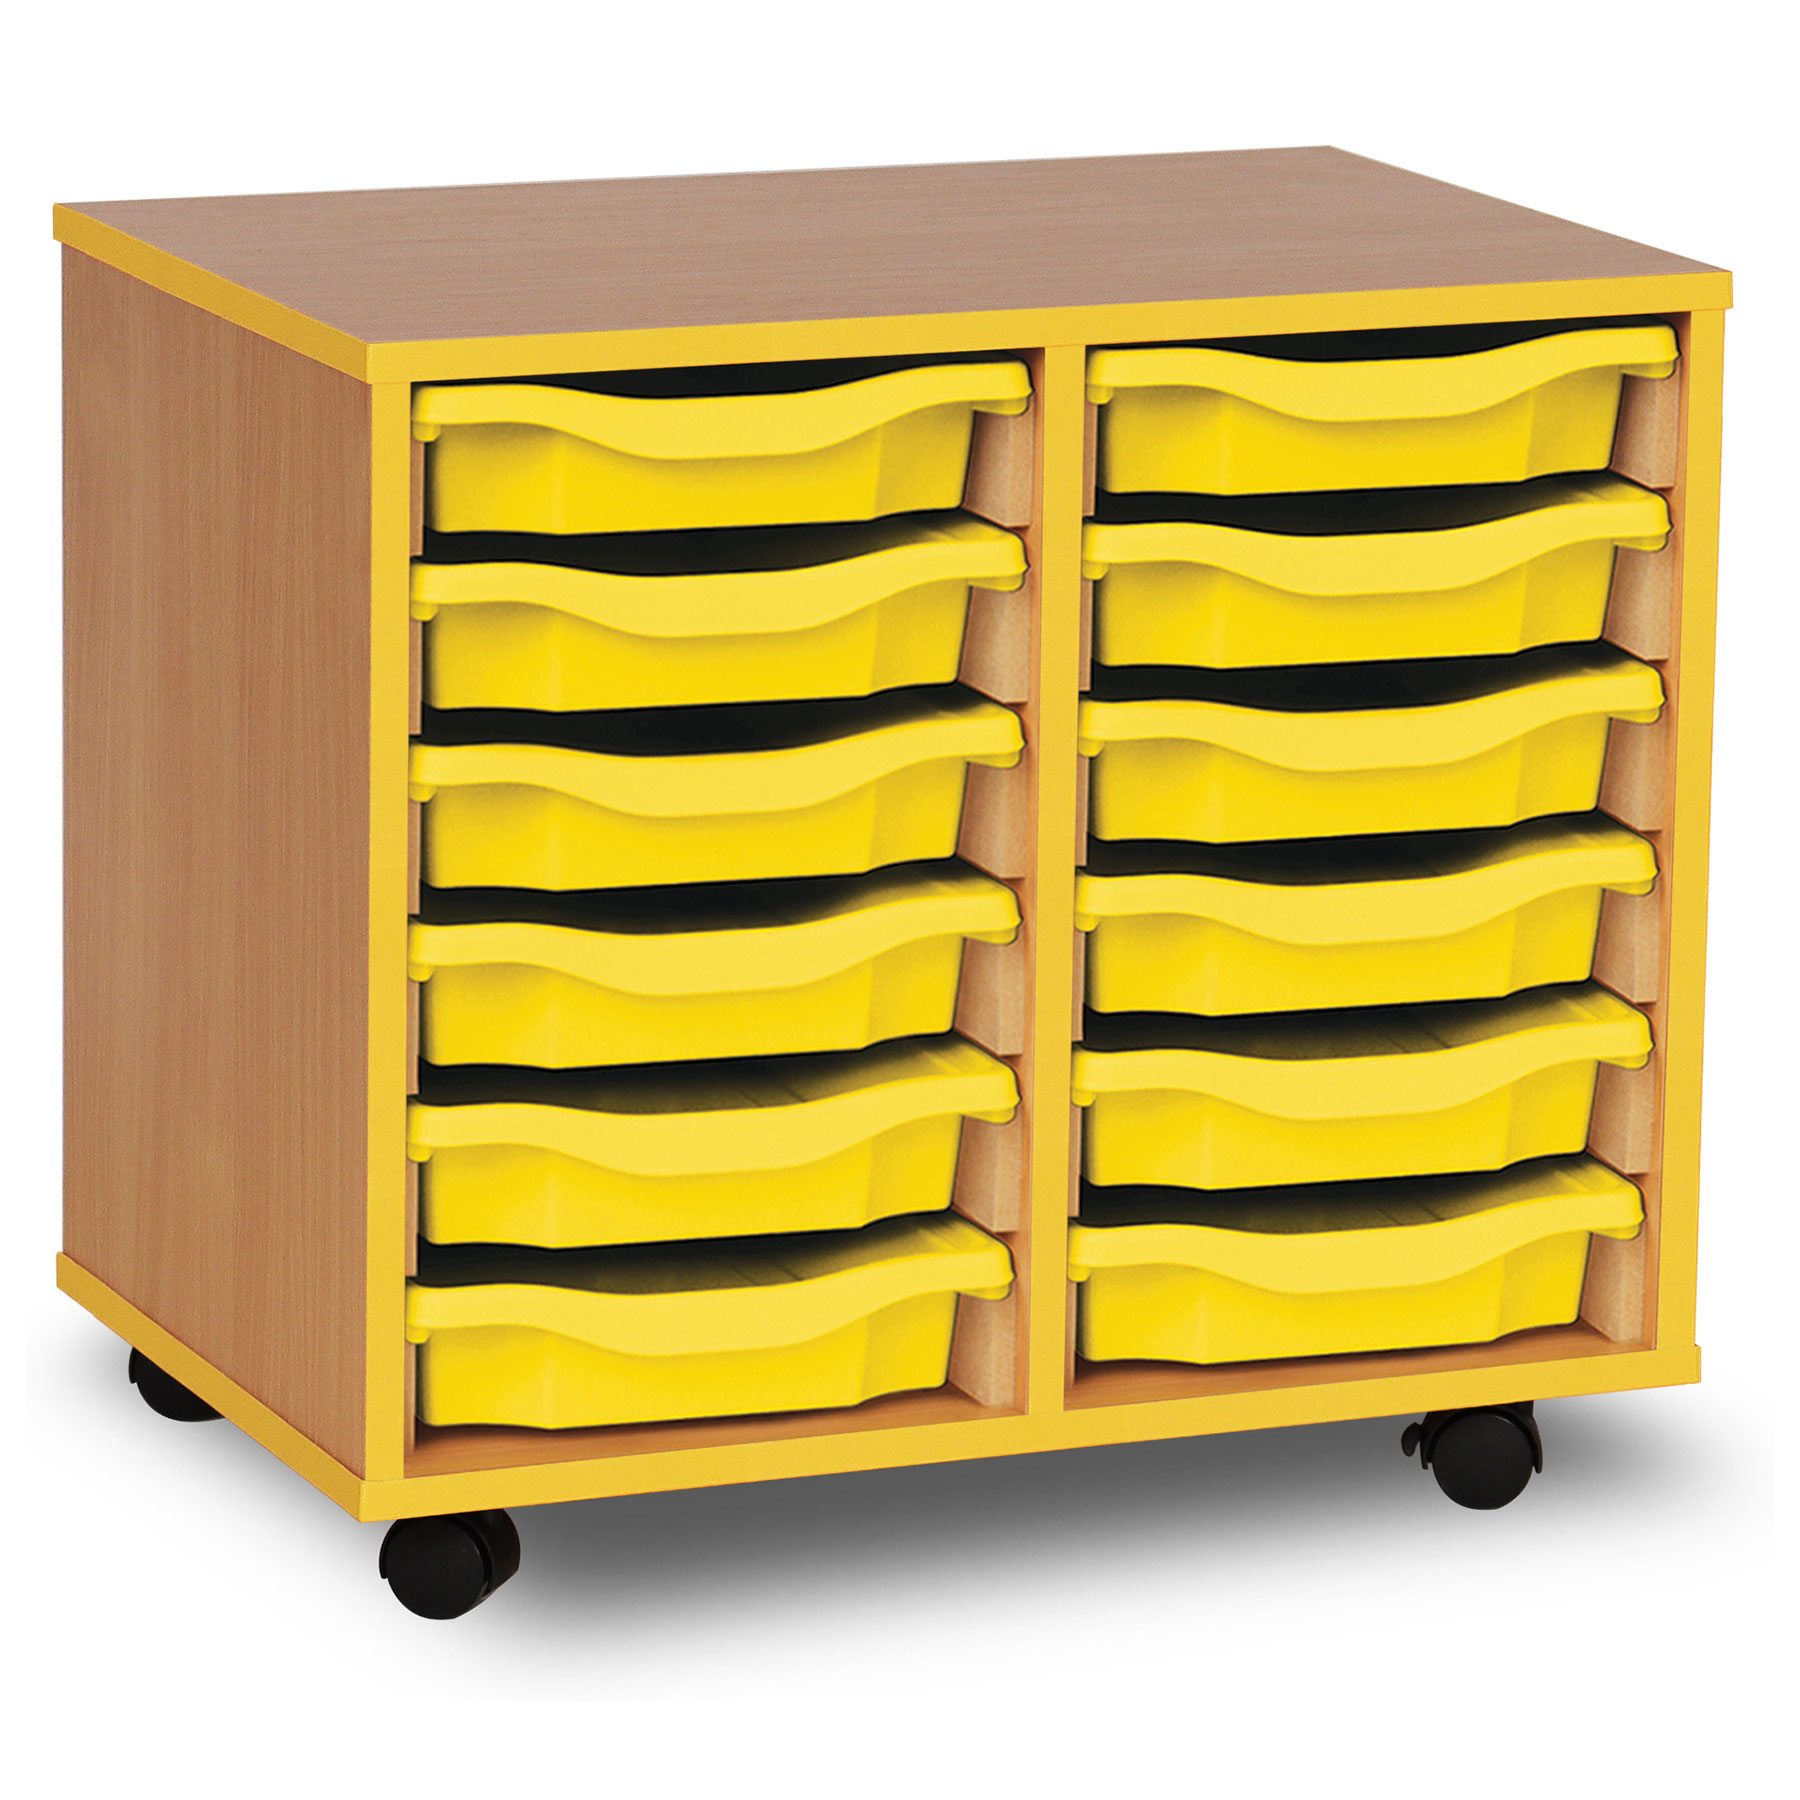 12 Single Tray Unit with Yellow Edging, Castors & Yellow Trays